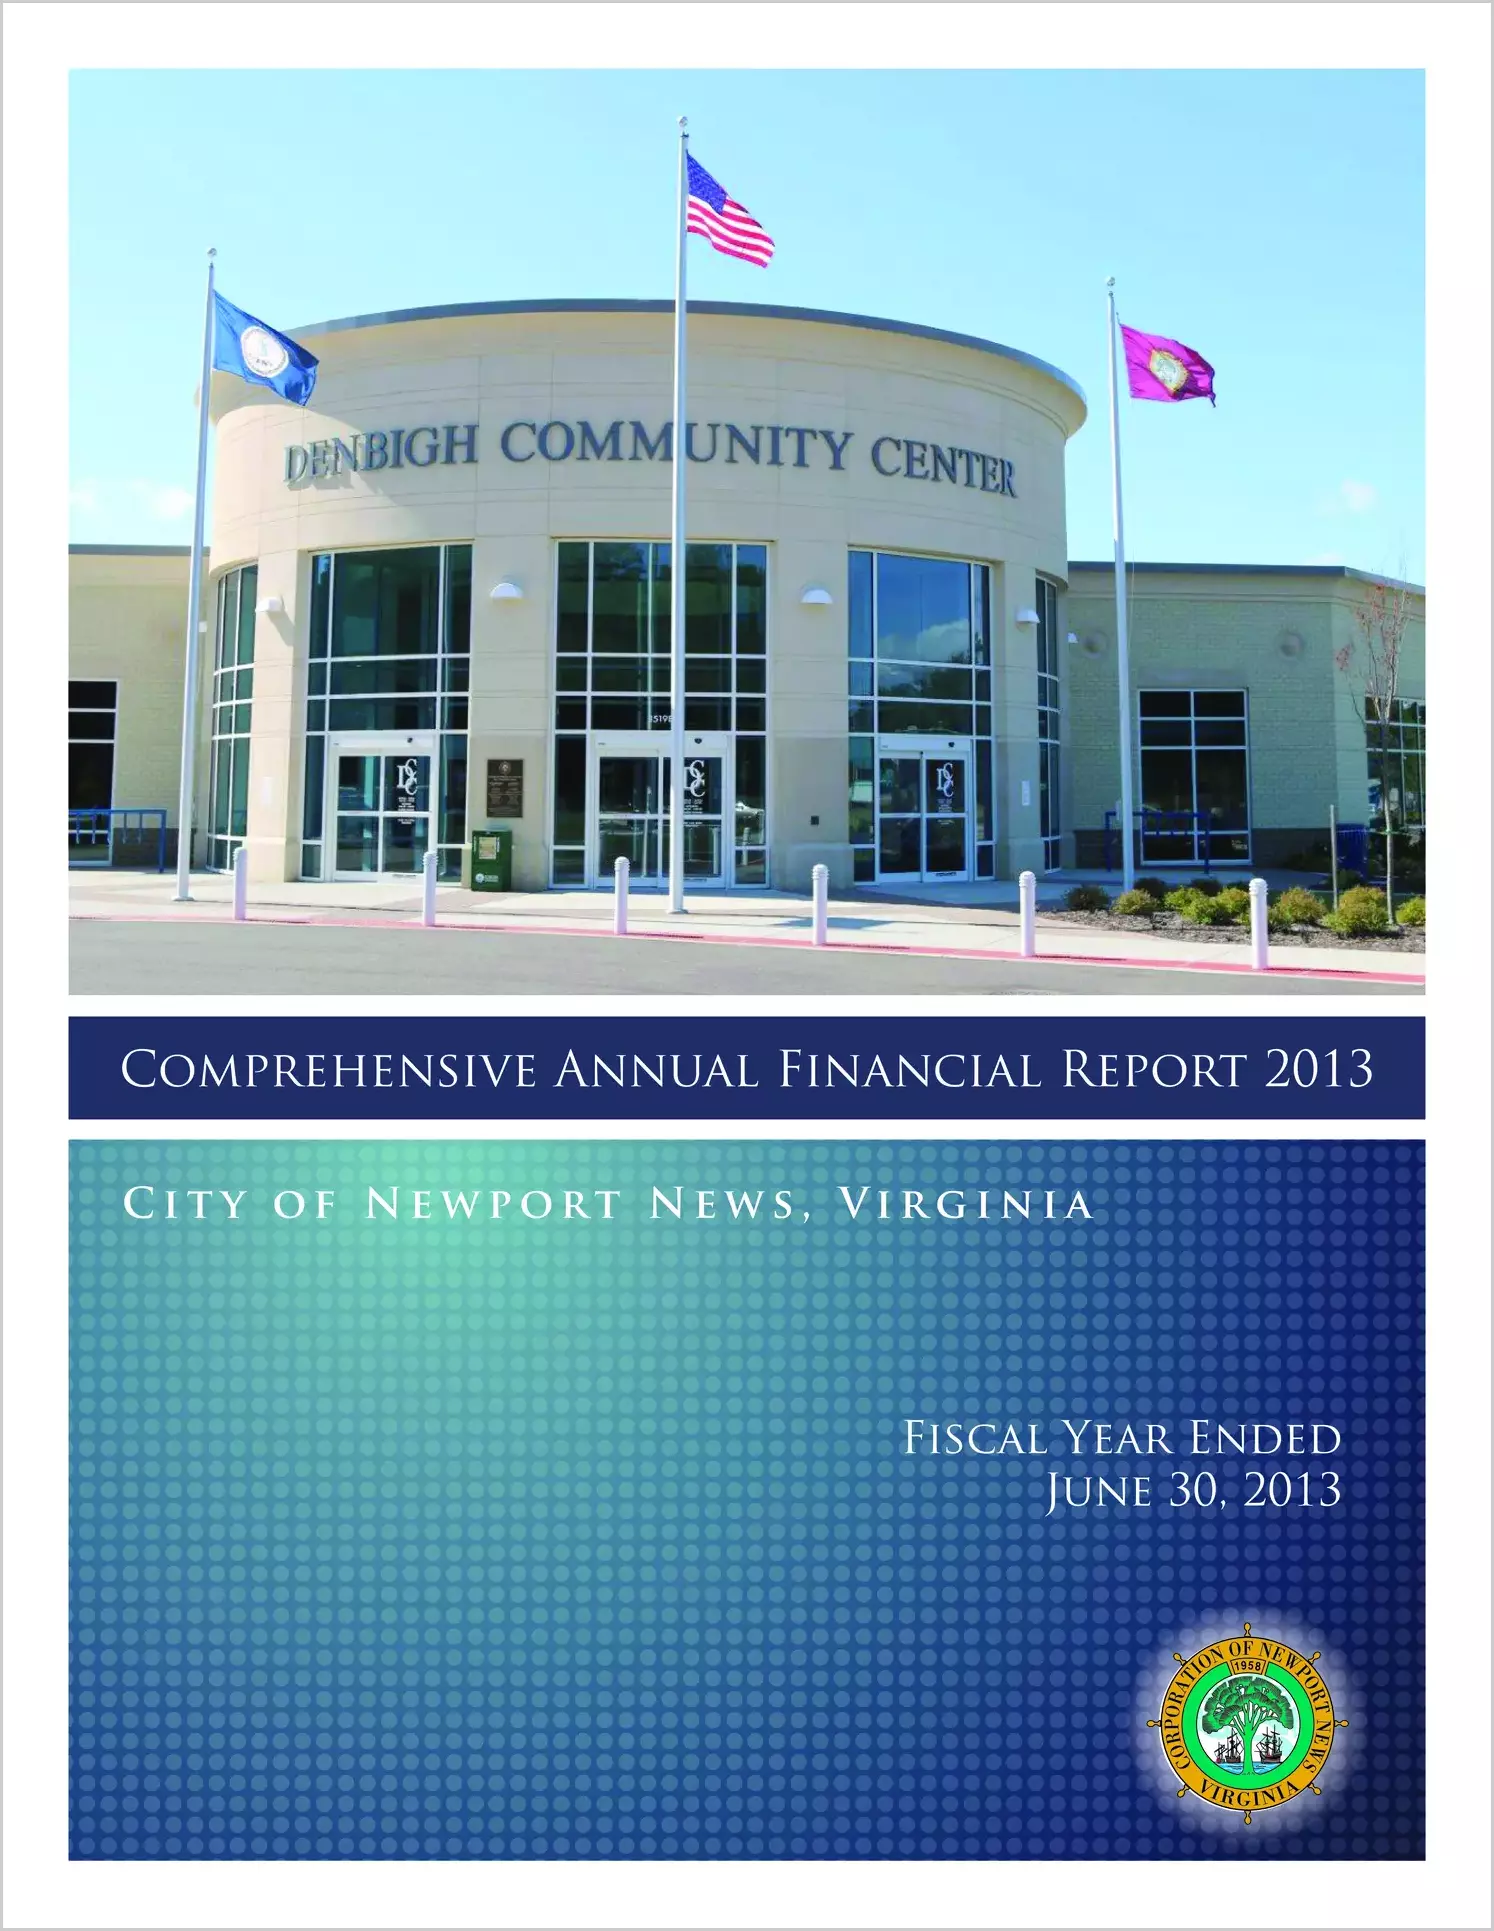 2013 Annual Financial Report for City of Newport News